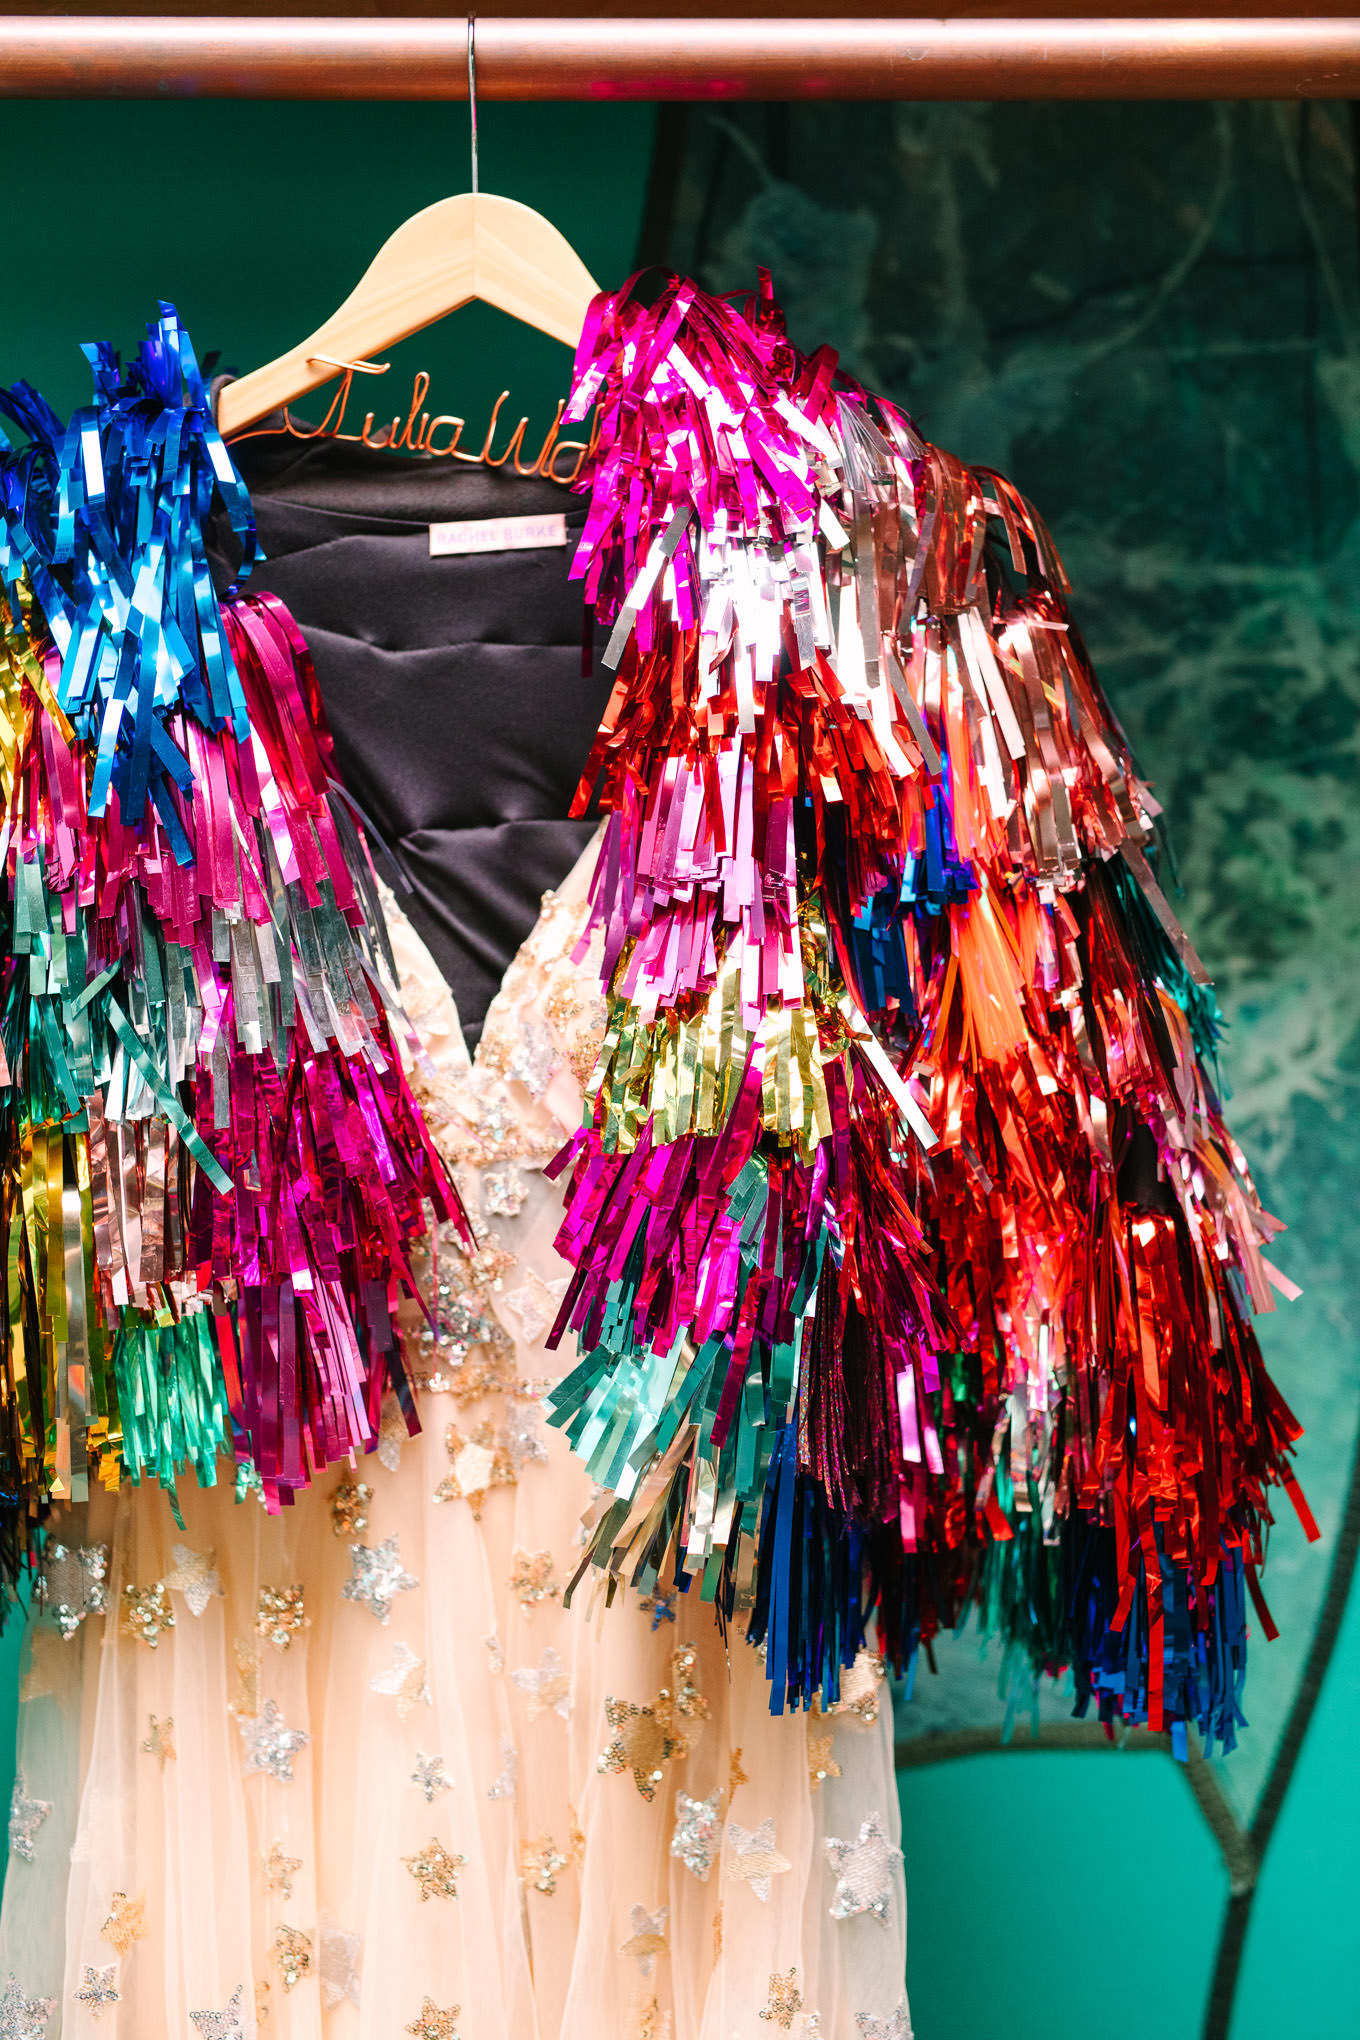 Rachel Burke tinsel jacket hanging on bridal gown | Colorful Downtown Los Angeles Valentine Wedding | Los Angeles wedding photographer | #losangeleswedding #colorfulwedding #DTLA #valentinedtla   Source: Mary Costa Photography | Los Angeles